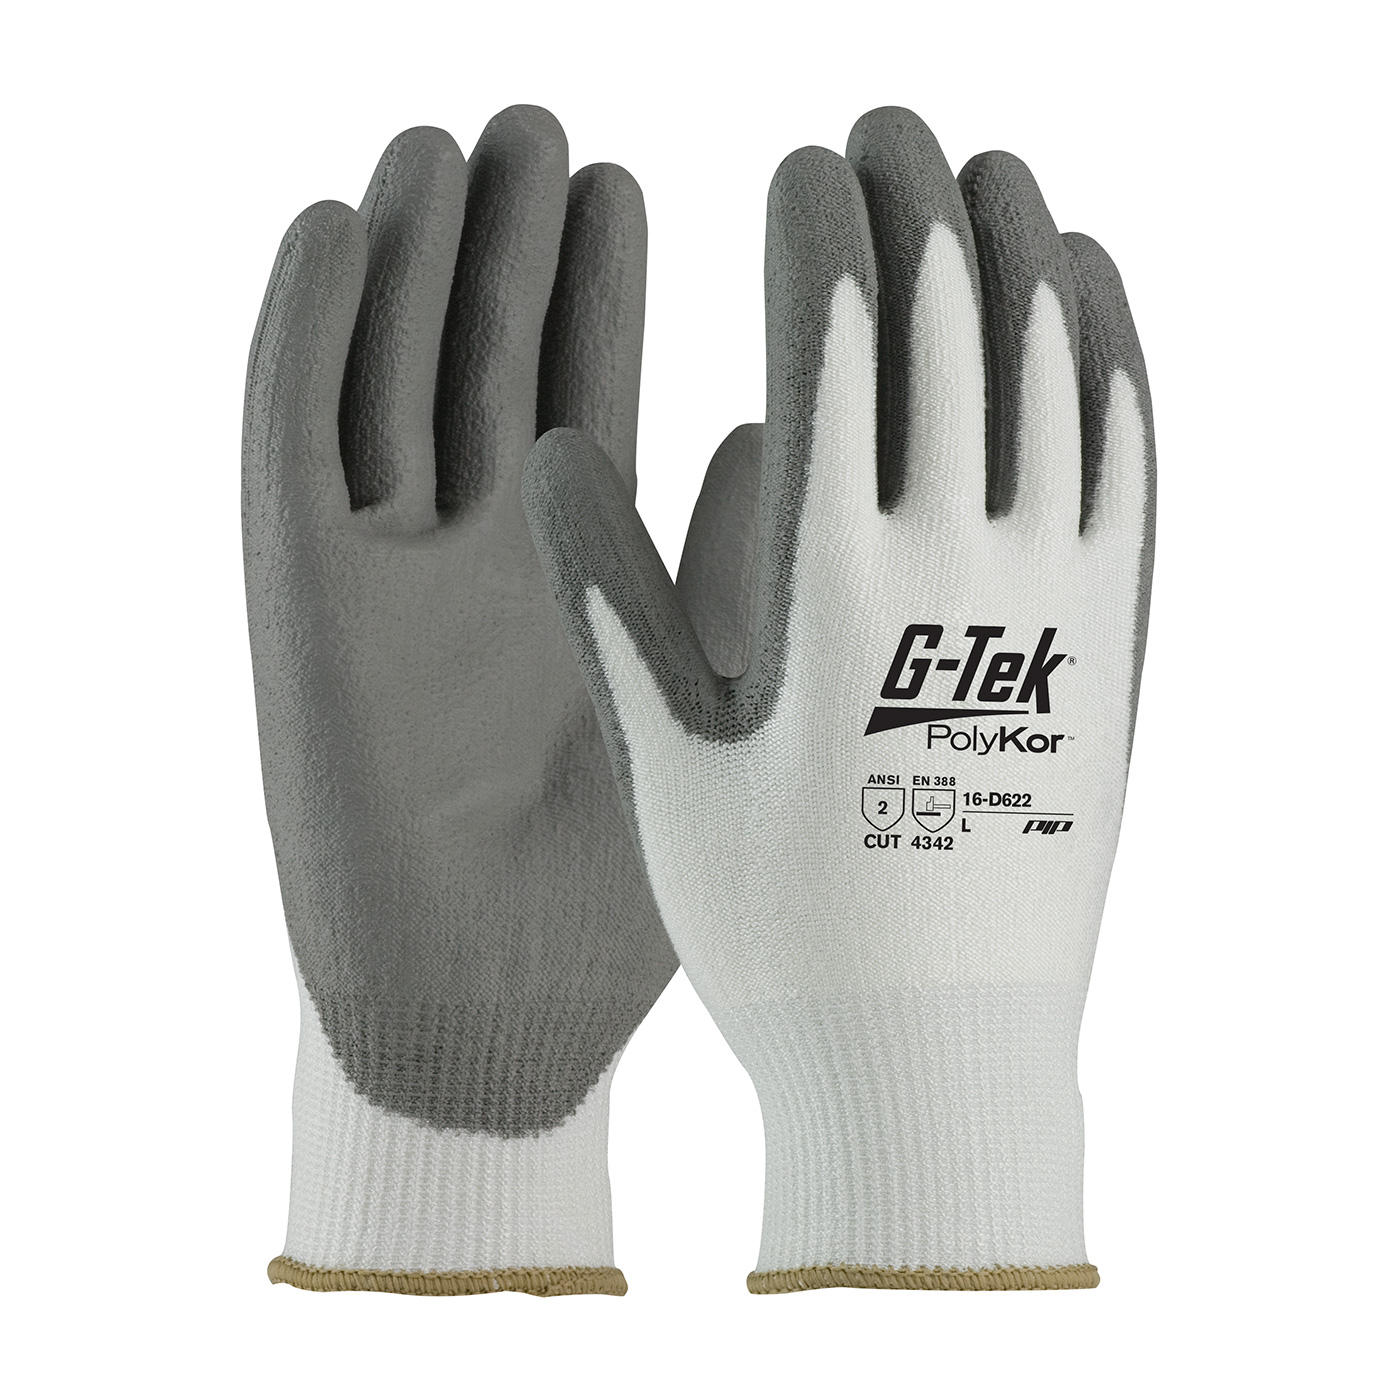 PIP 16-D622/L G-Tek PolyKor Seamless Knit PolyKor Blended Glove with Polyurethane Coated Smooth Grip on Palm & Fingers - Large PID-16 D622 L